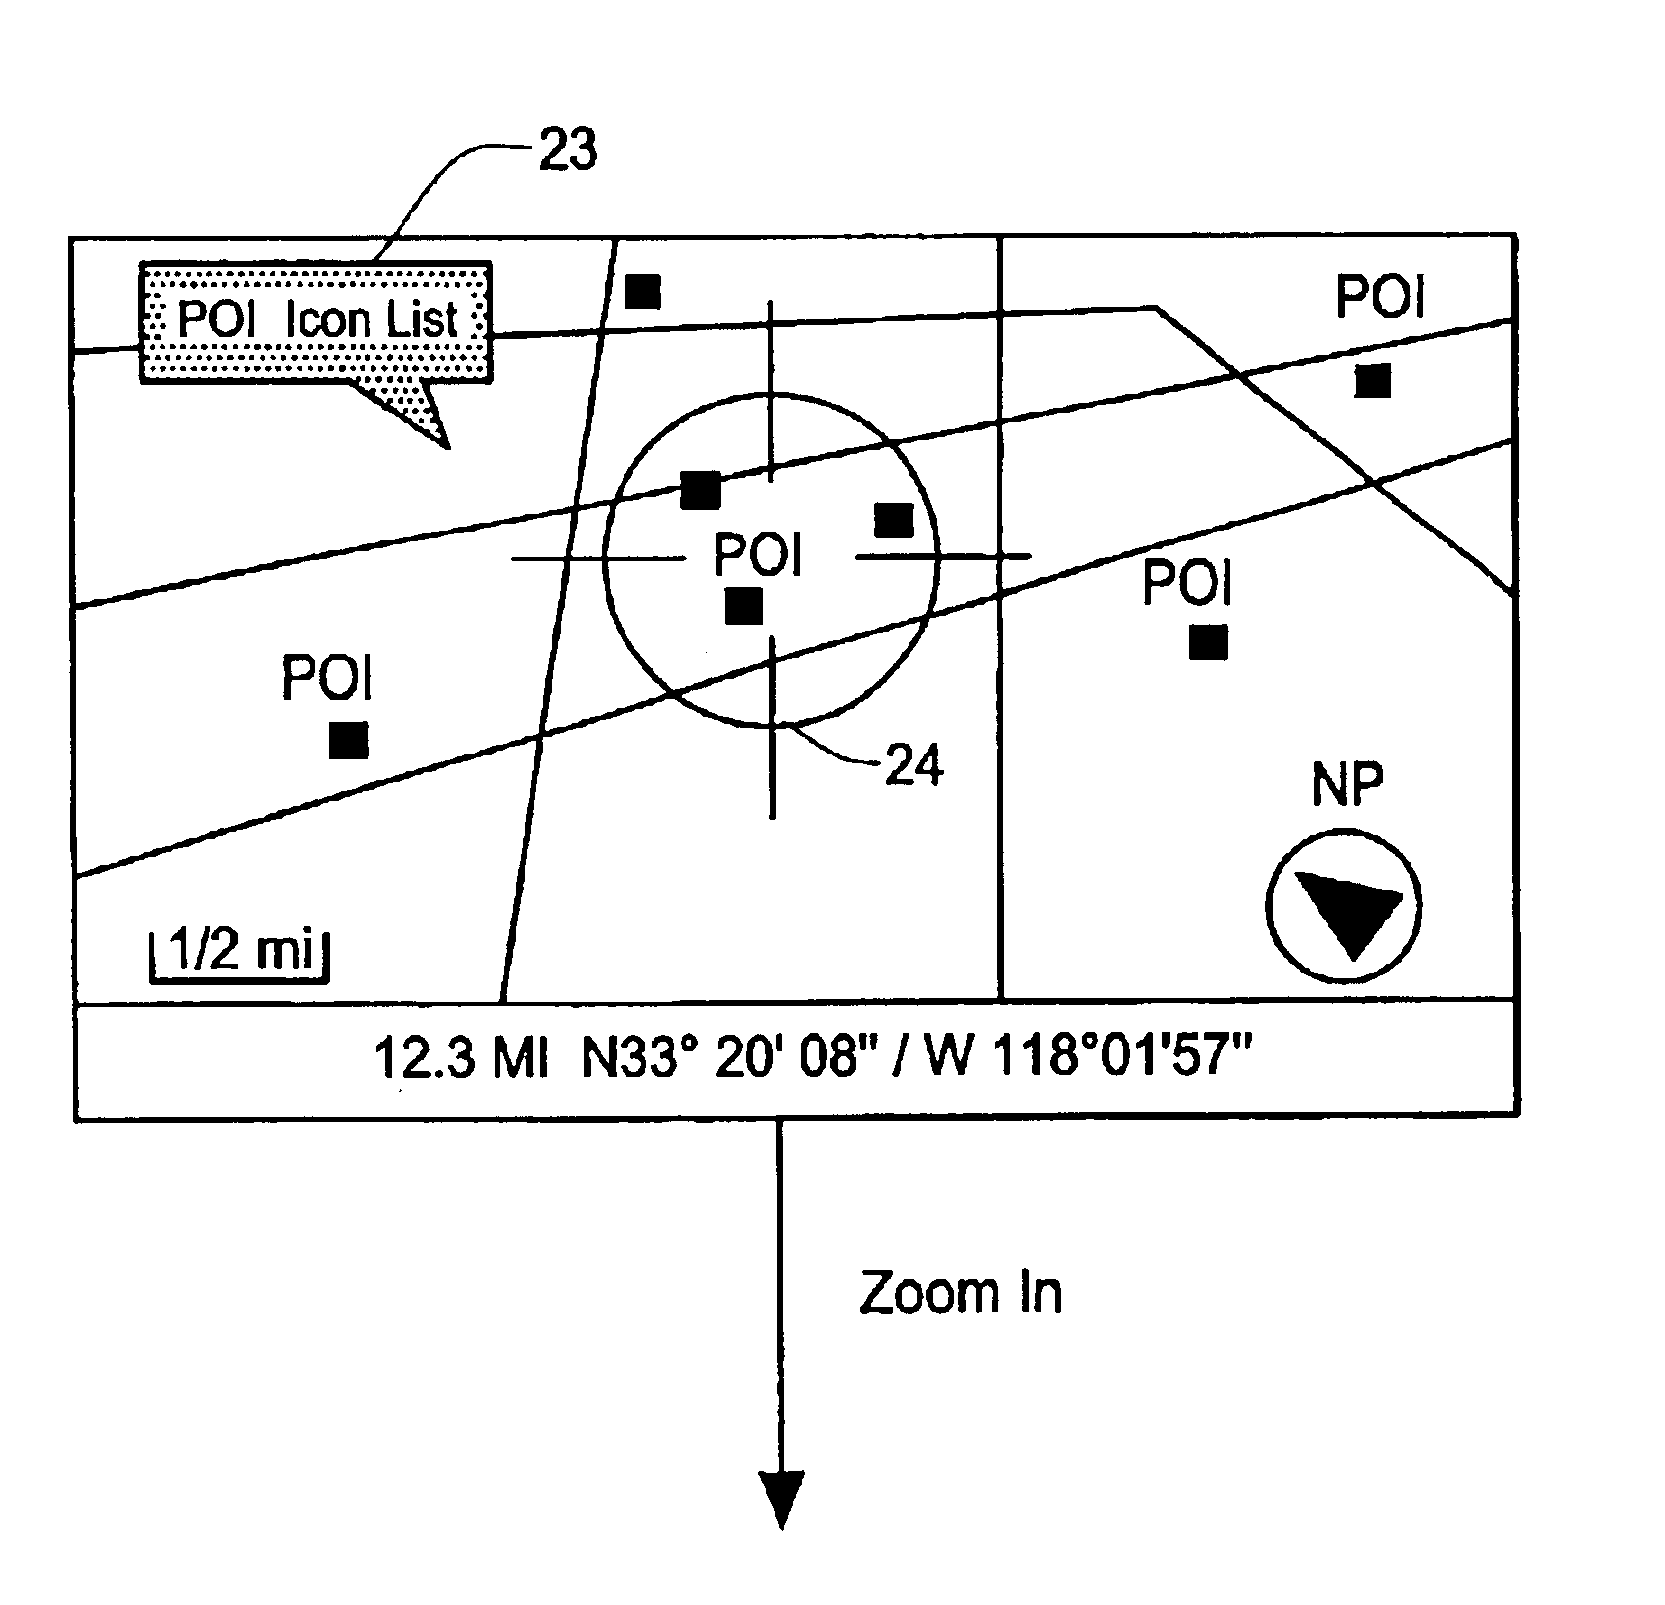 Display method and apparatus for navigation system